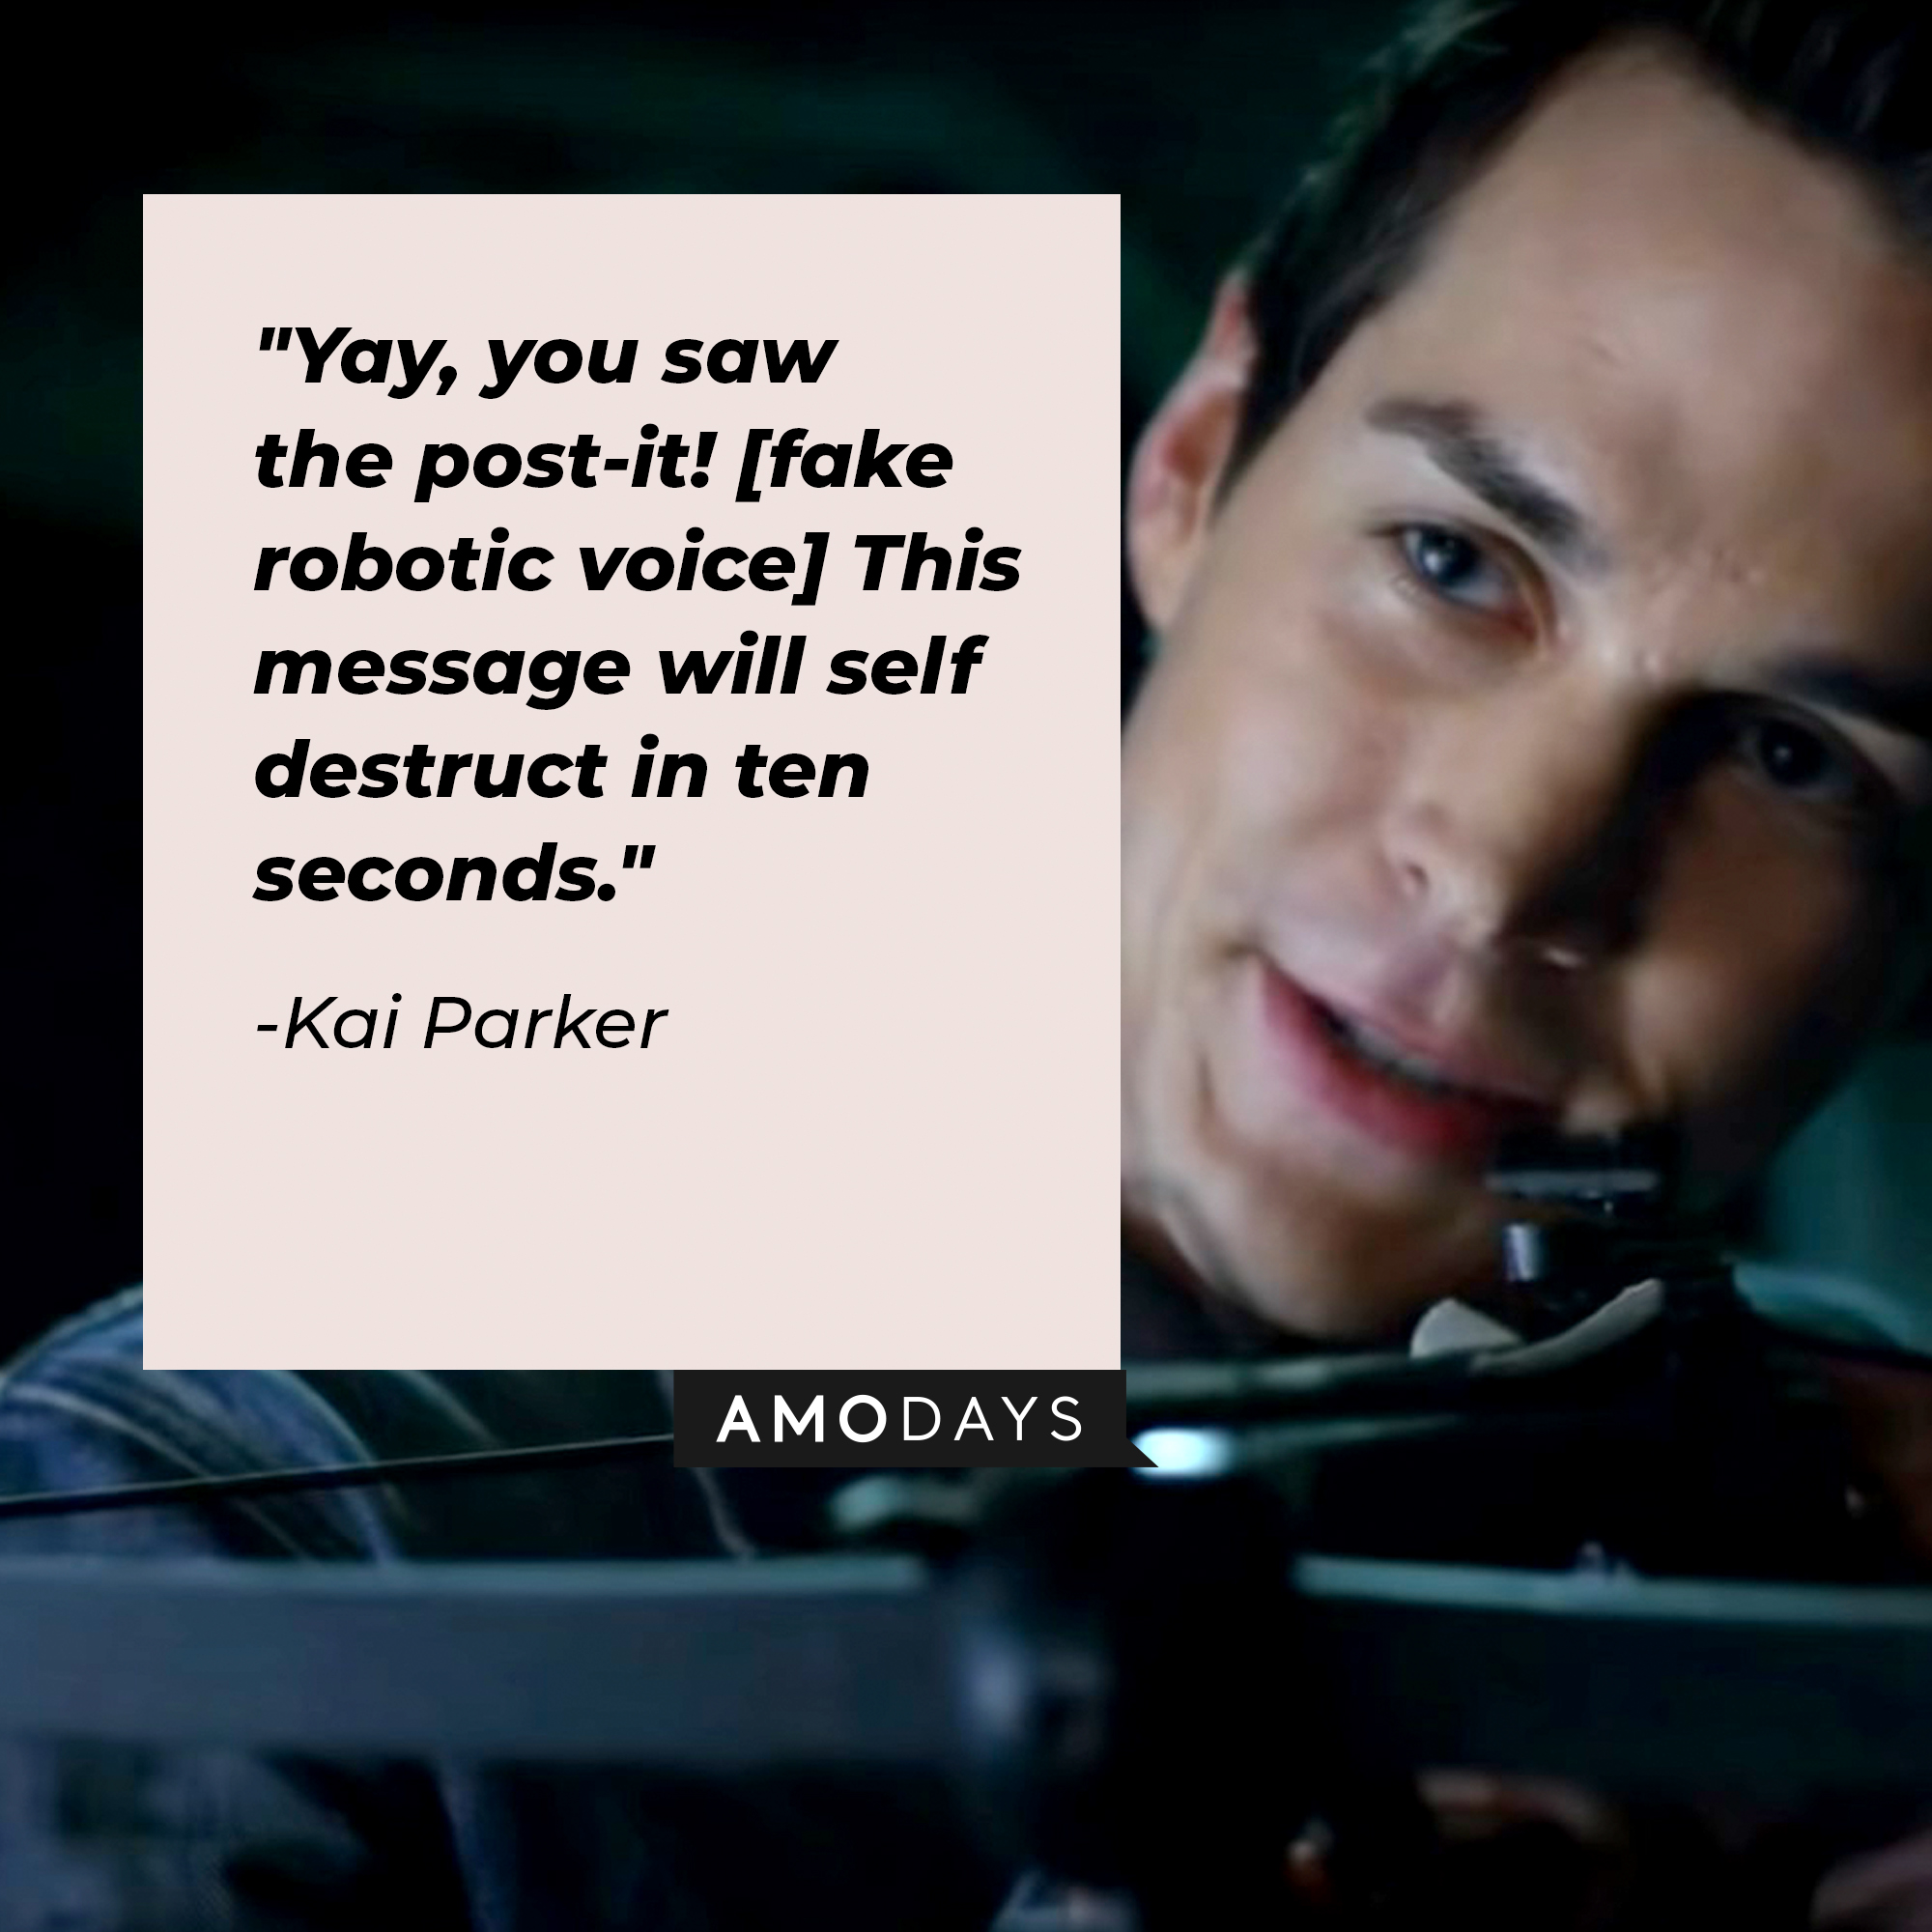 Kai Parker's quote: "Yay, you saw the post-it! [fake robotic voice] This message will self destruct in ten seconds." | Source: Facebook.com/thevampirediaries